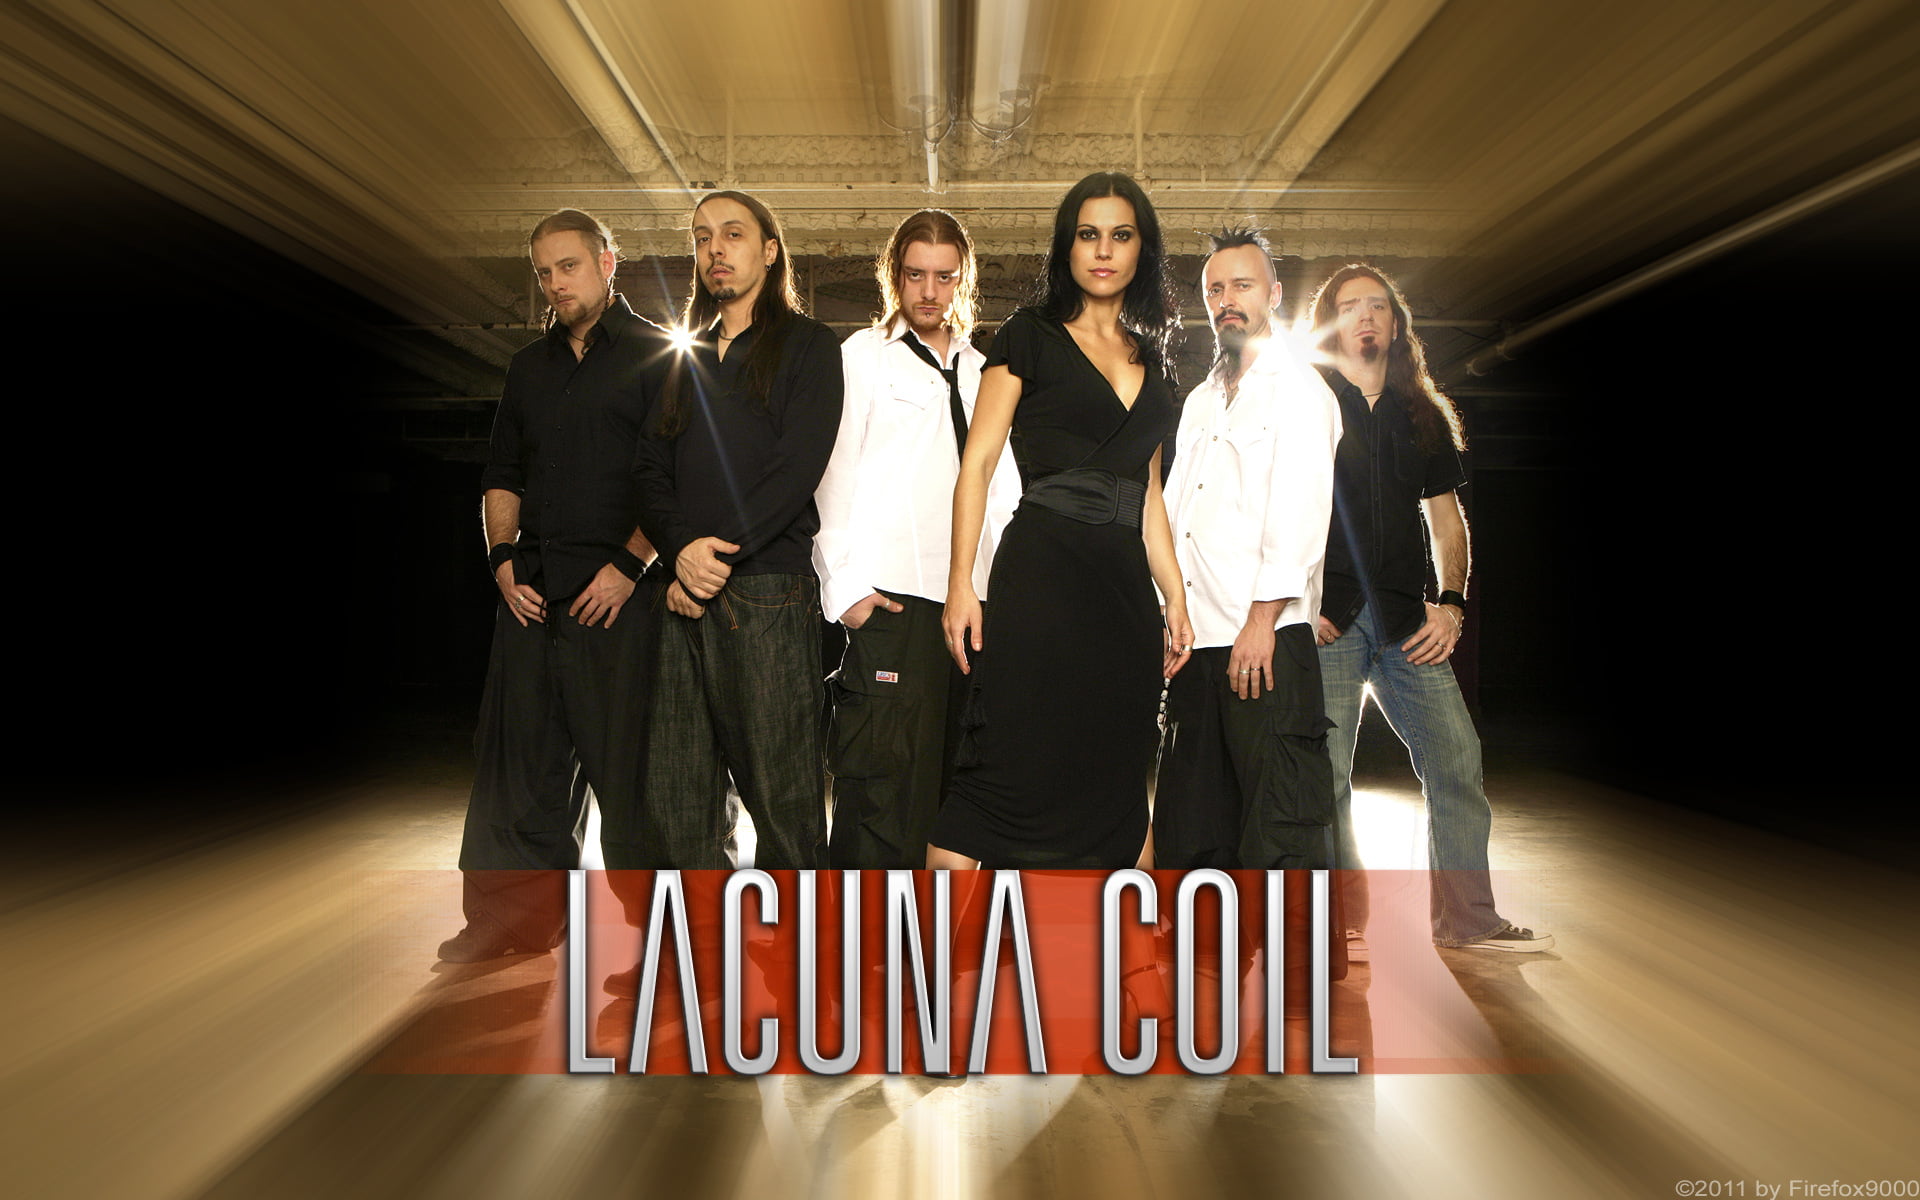 Lacuna Coil, metal music, Cristina Scabbia, band, group of people